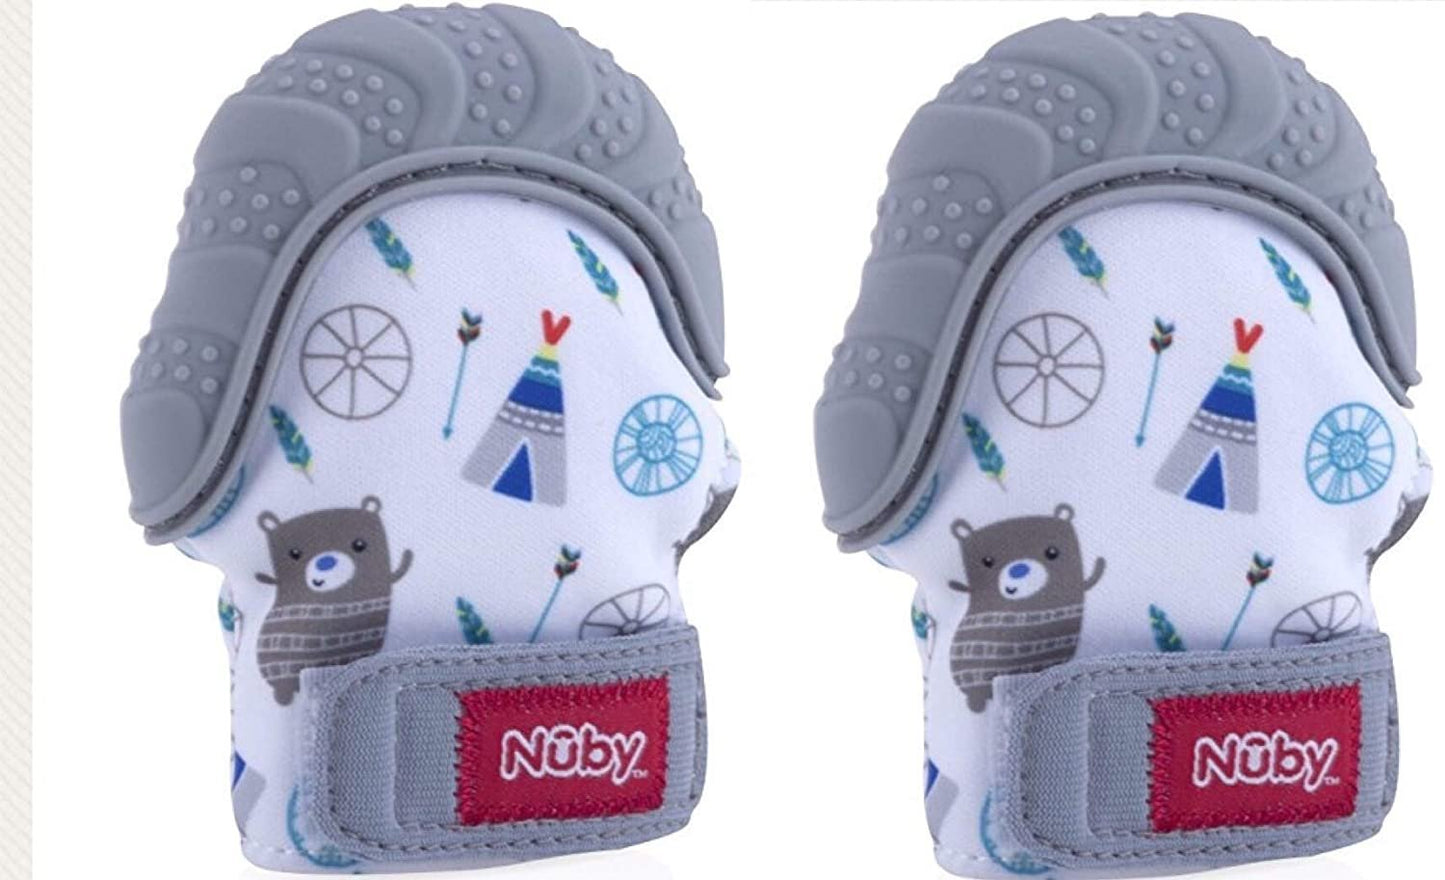 Nuby Soothing Teething Mitten with Hygienic Travel Bag